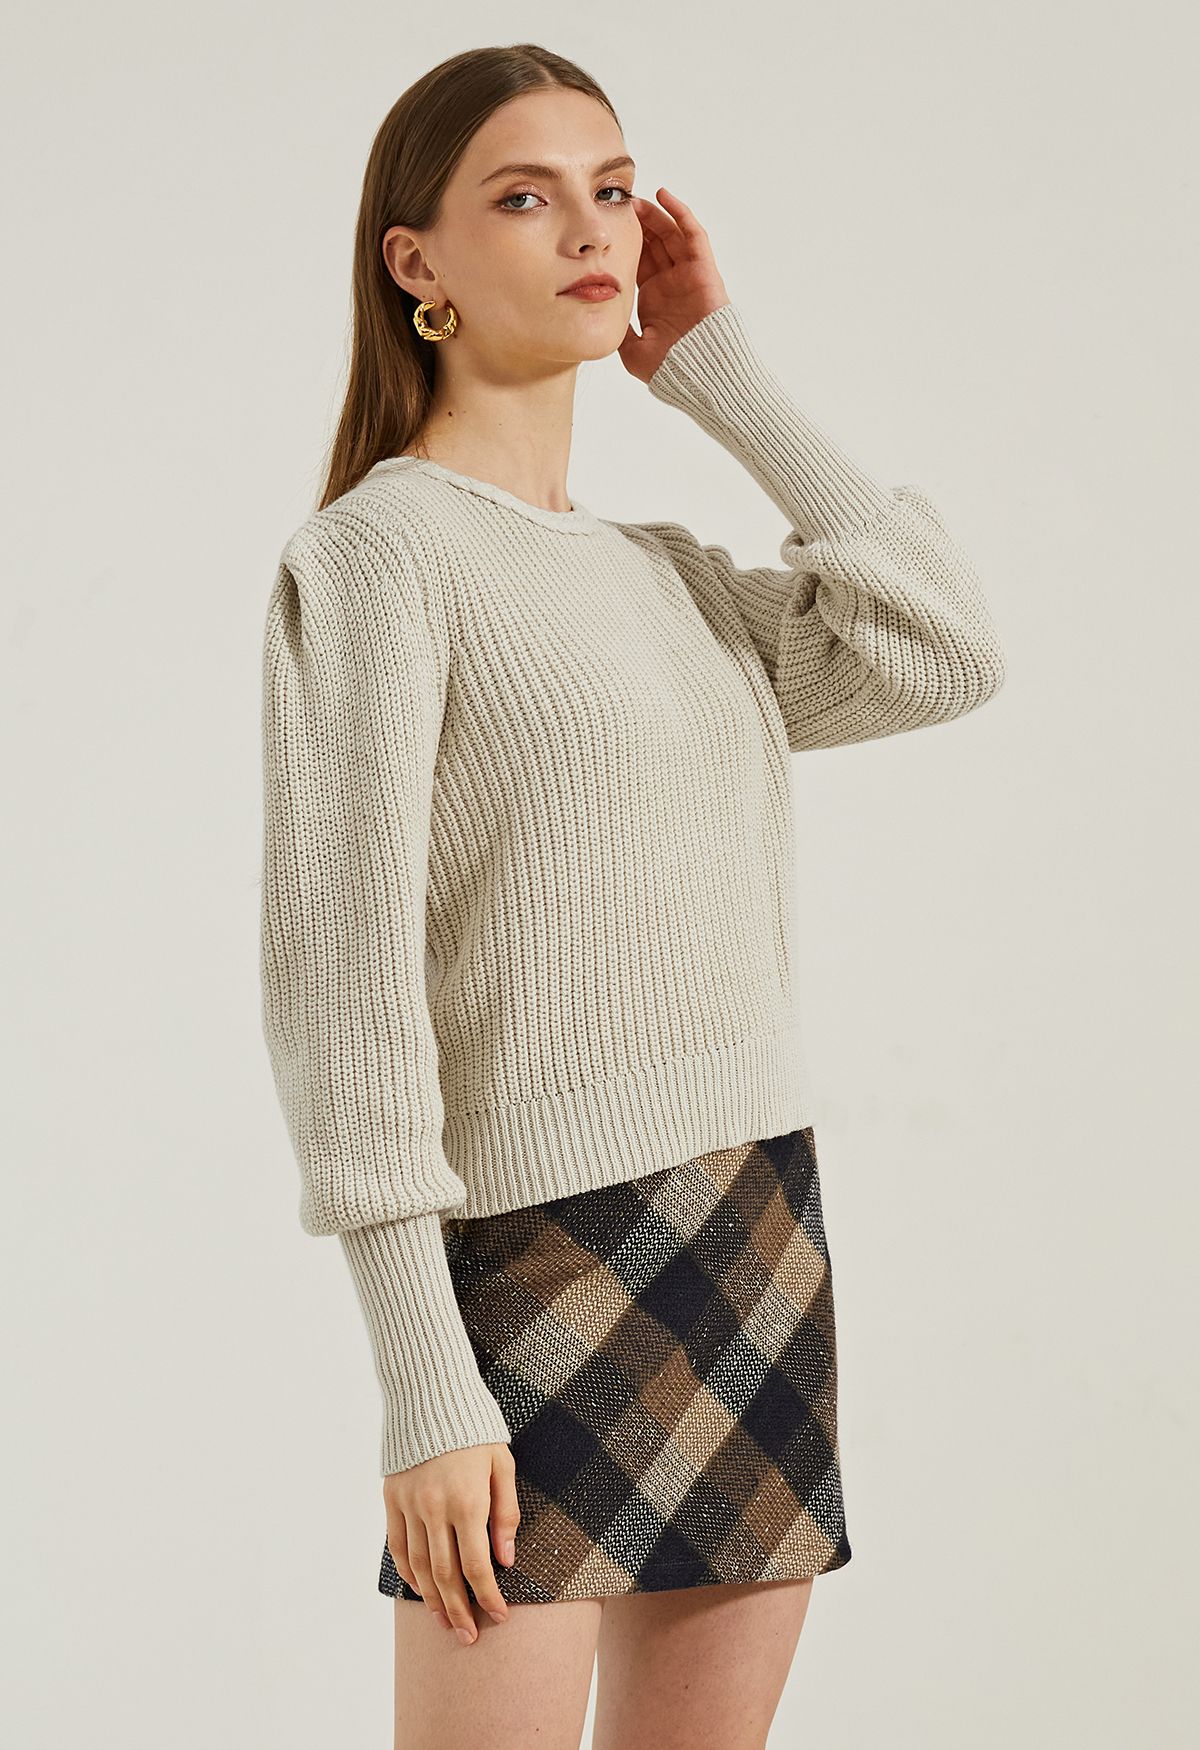 Braided Neck Puff Sleeve Rib Knit Top in Oatmeal